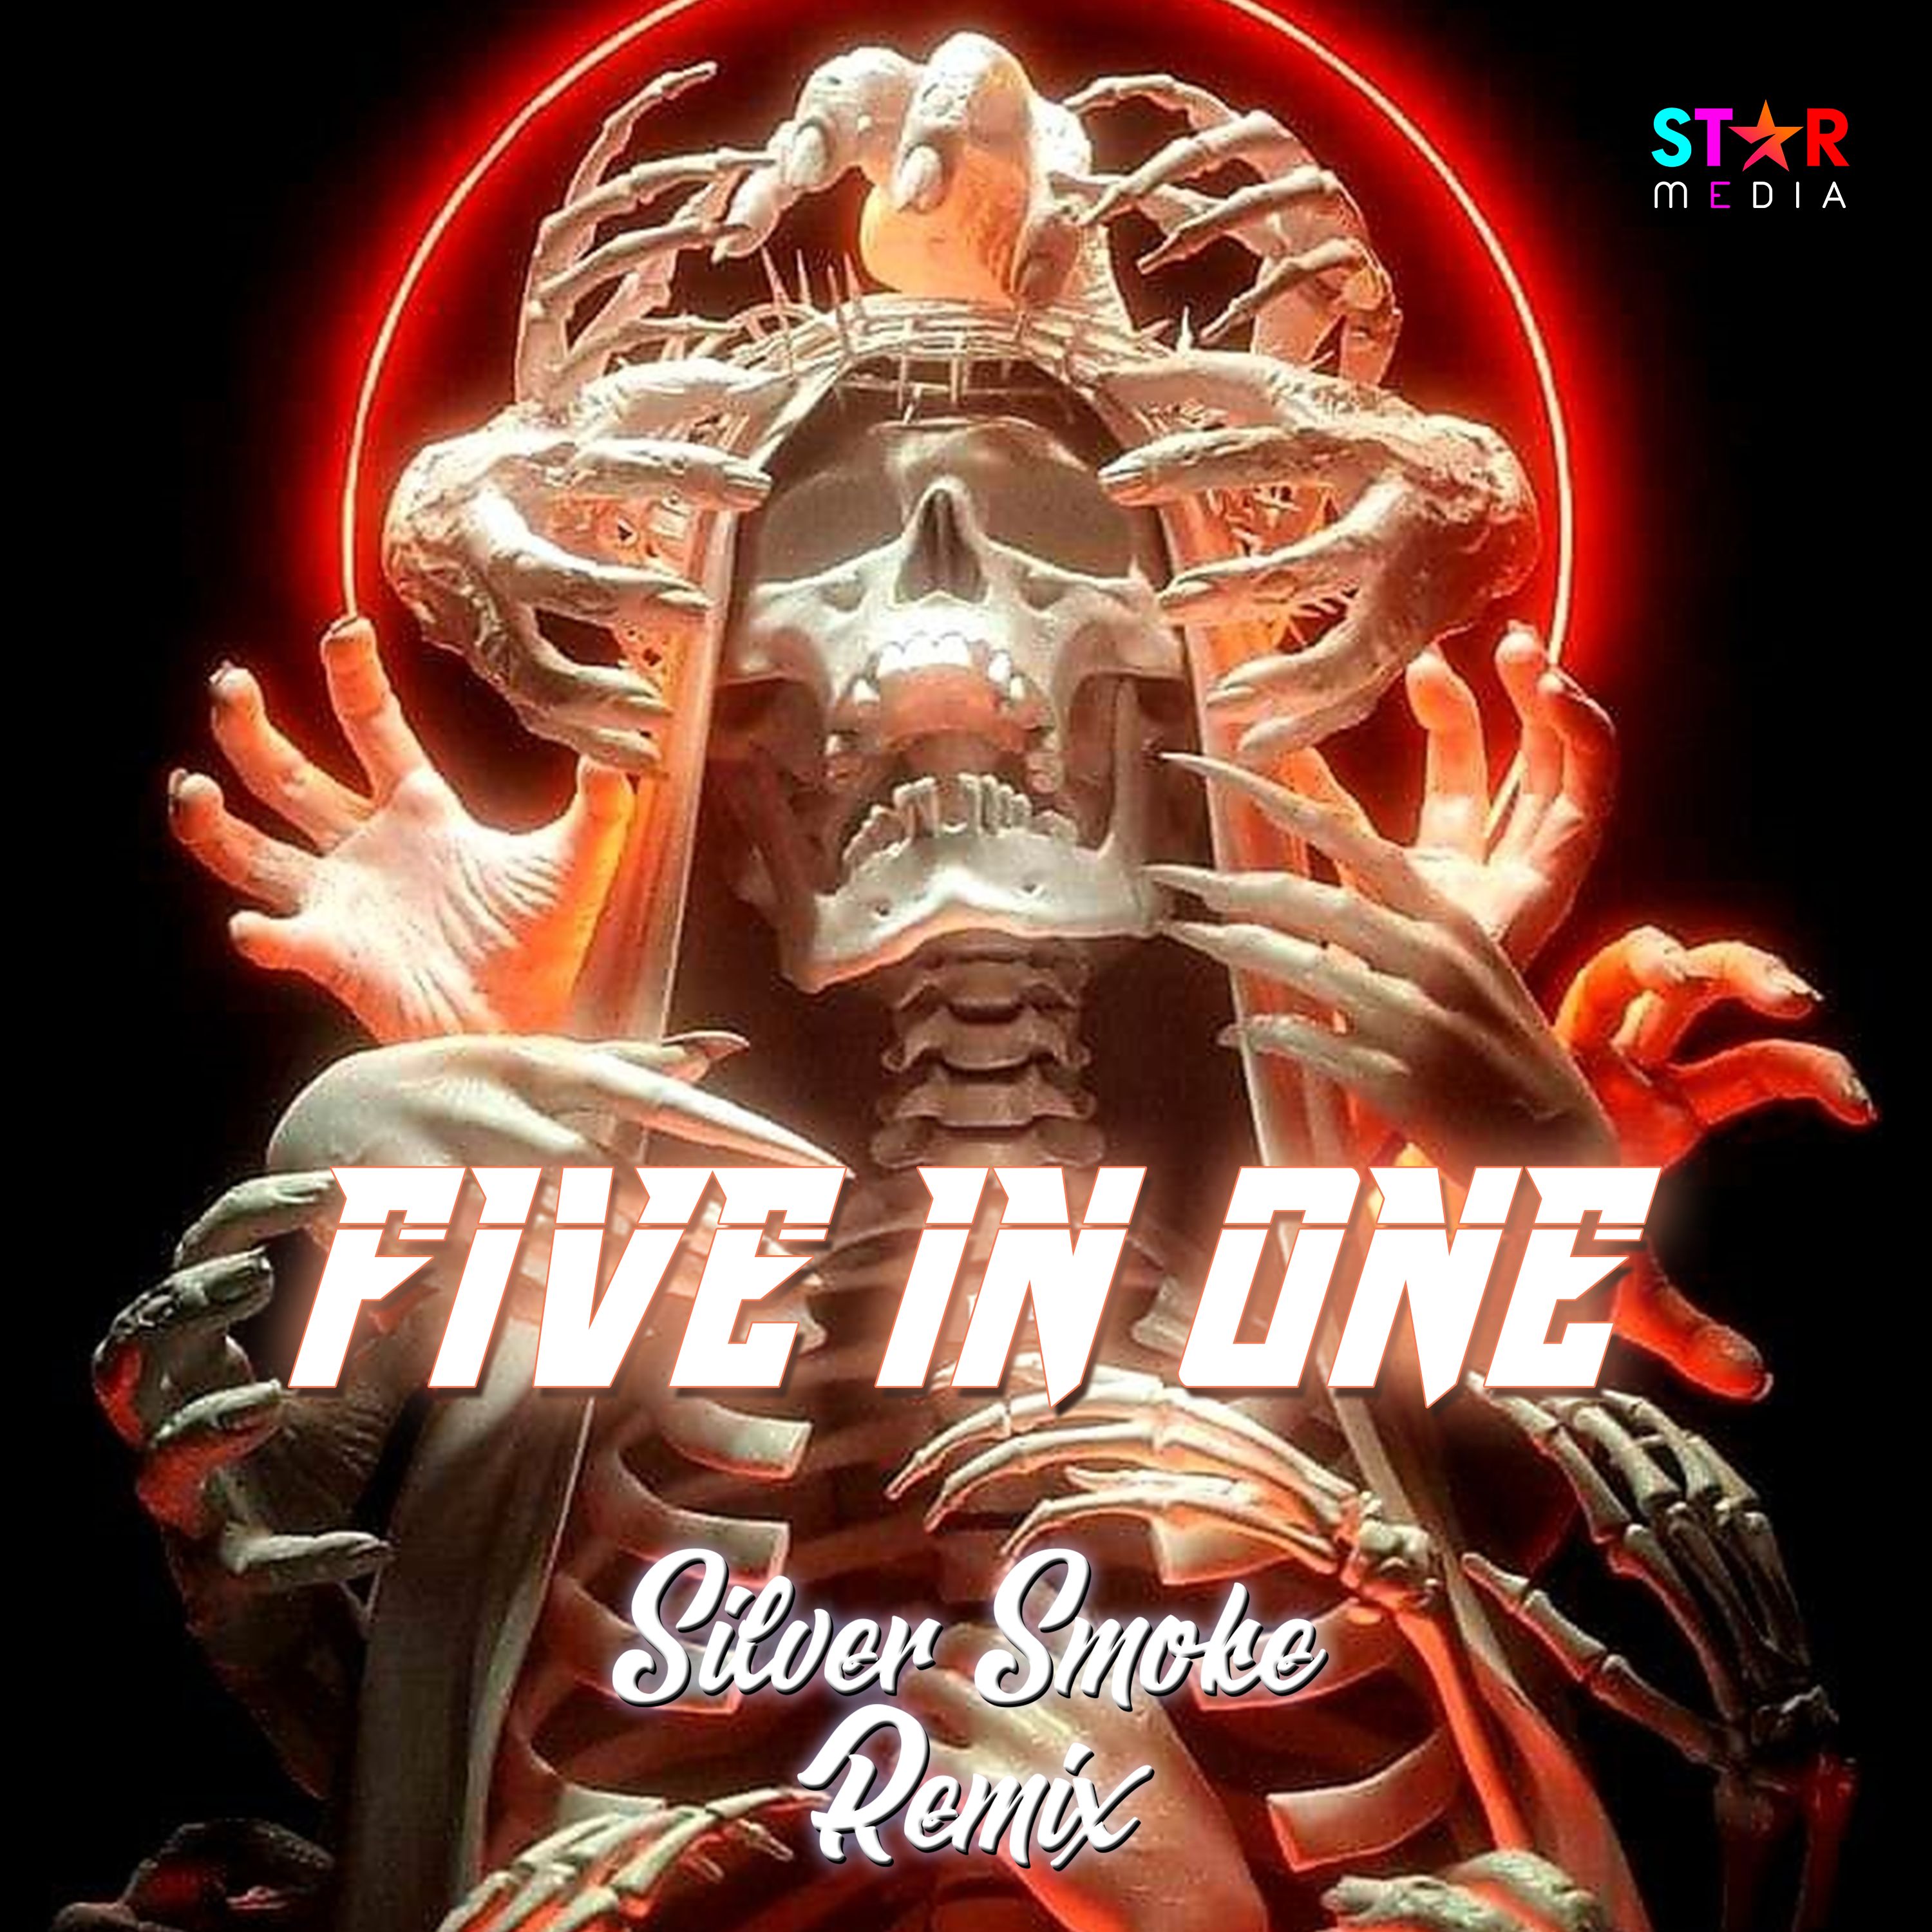 Lae alla 5 IN 1 - SILVER SMOKE REMIX (Out Out,The Magic Key,Butterfly,Party Started,Bóng Tối Trước Bình Minh)